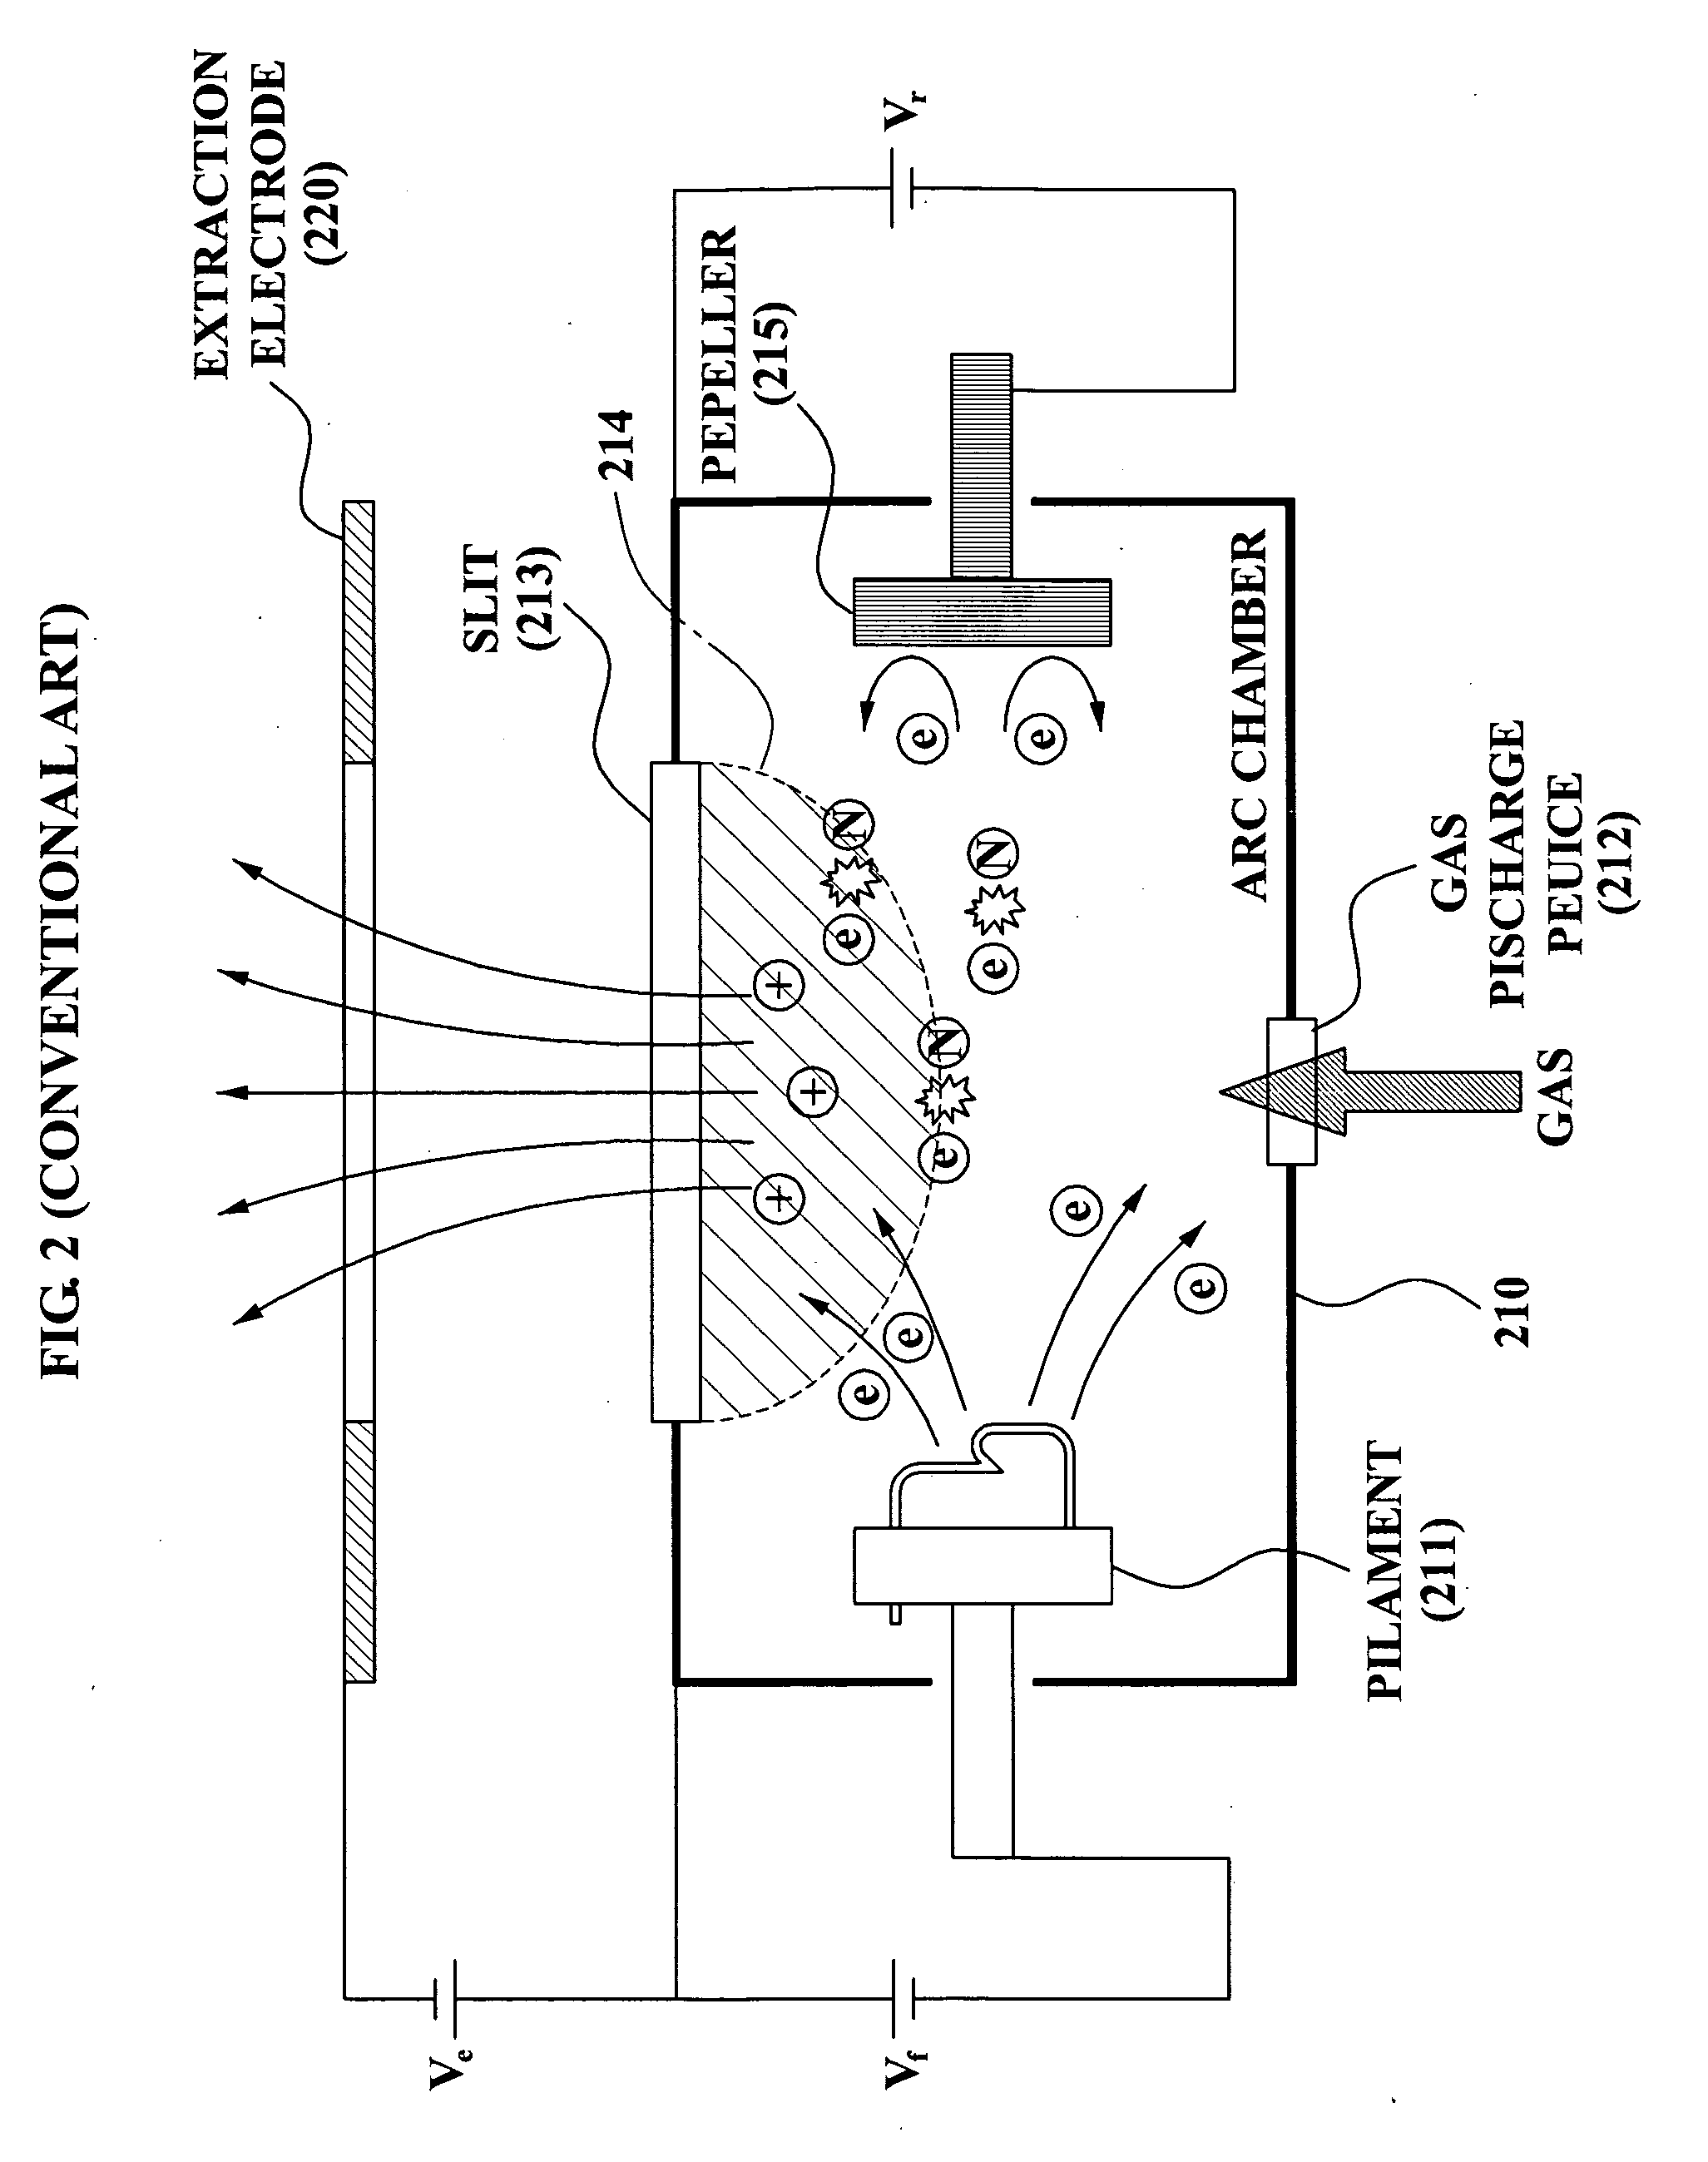 Apparatus and method for generating ions of an ion implanter